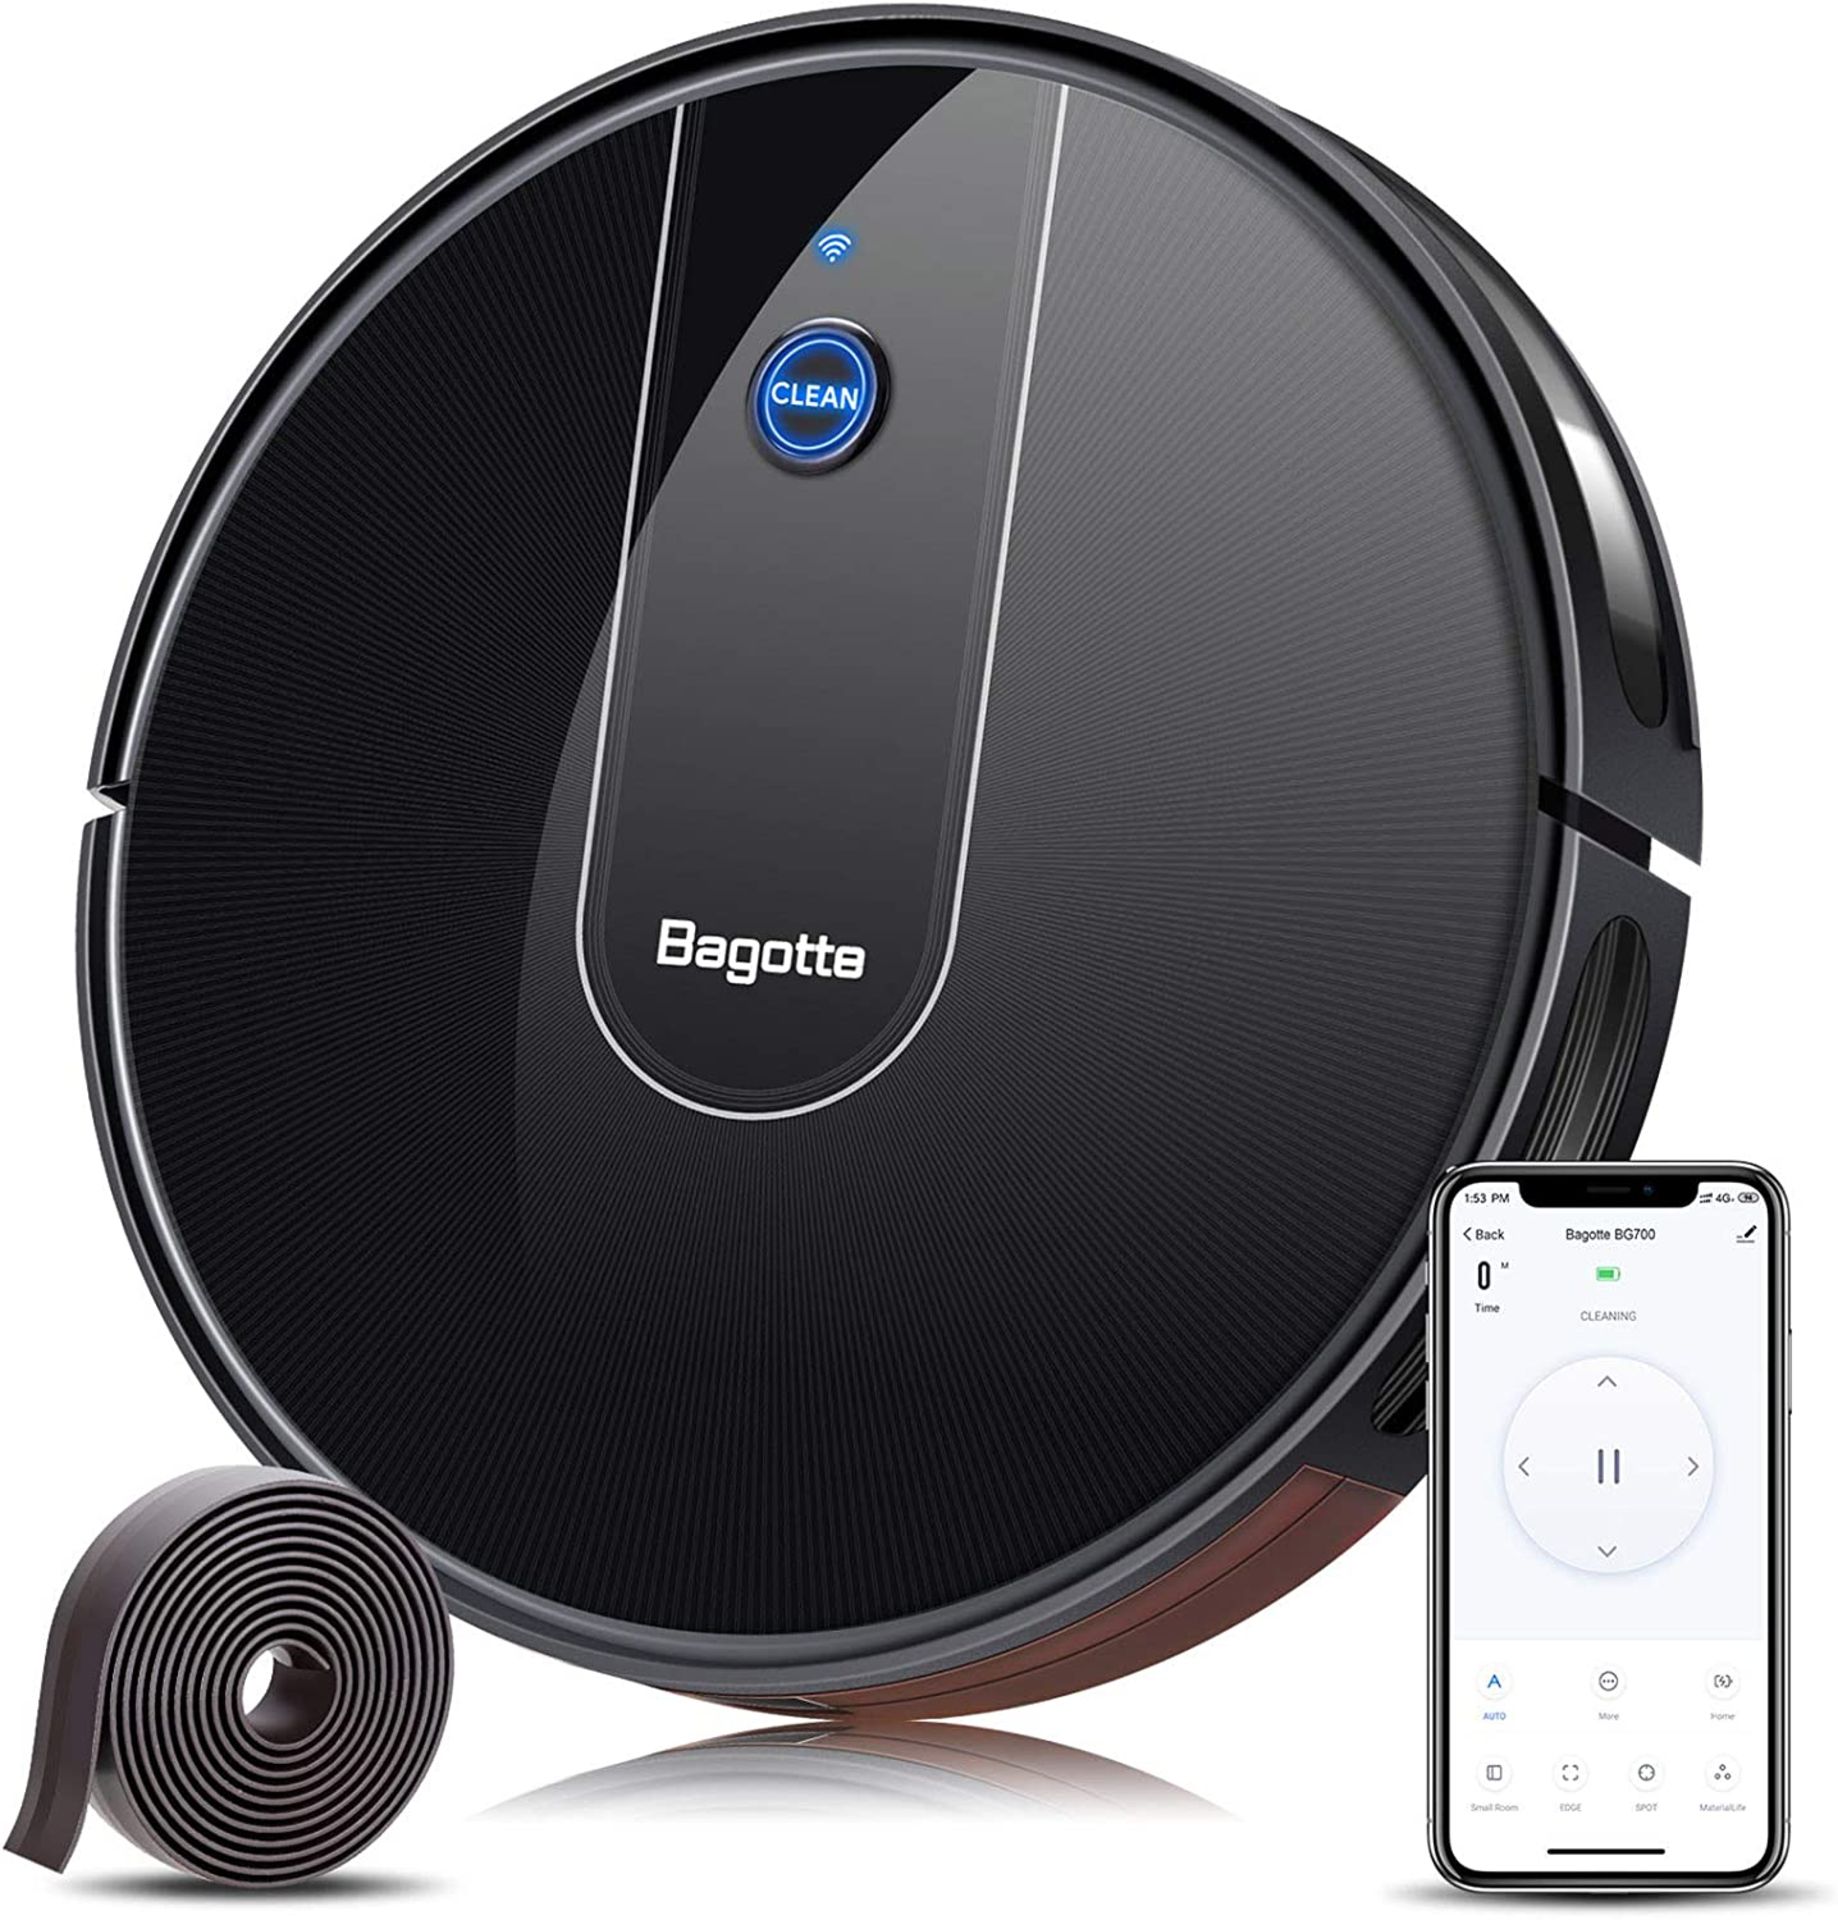 Bagotte BG700 Wi-Fi Robot Vacuum with mop - 2.7" Thin, Strong Suction, Work with Alexa